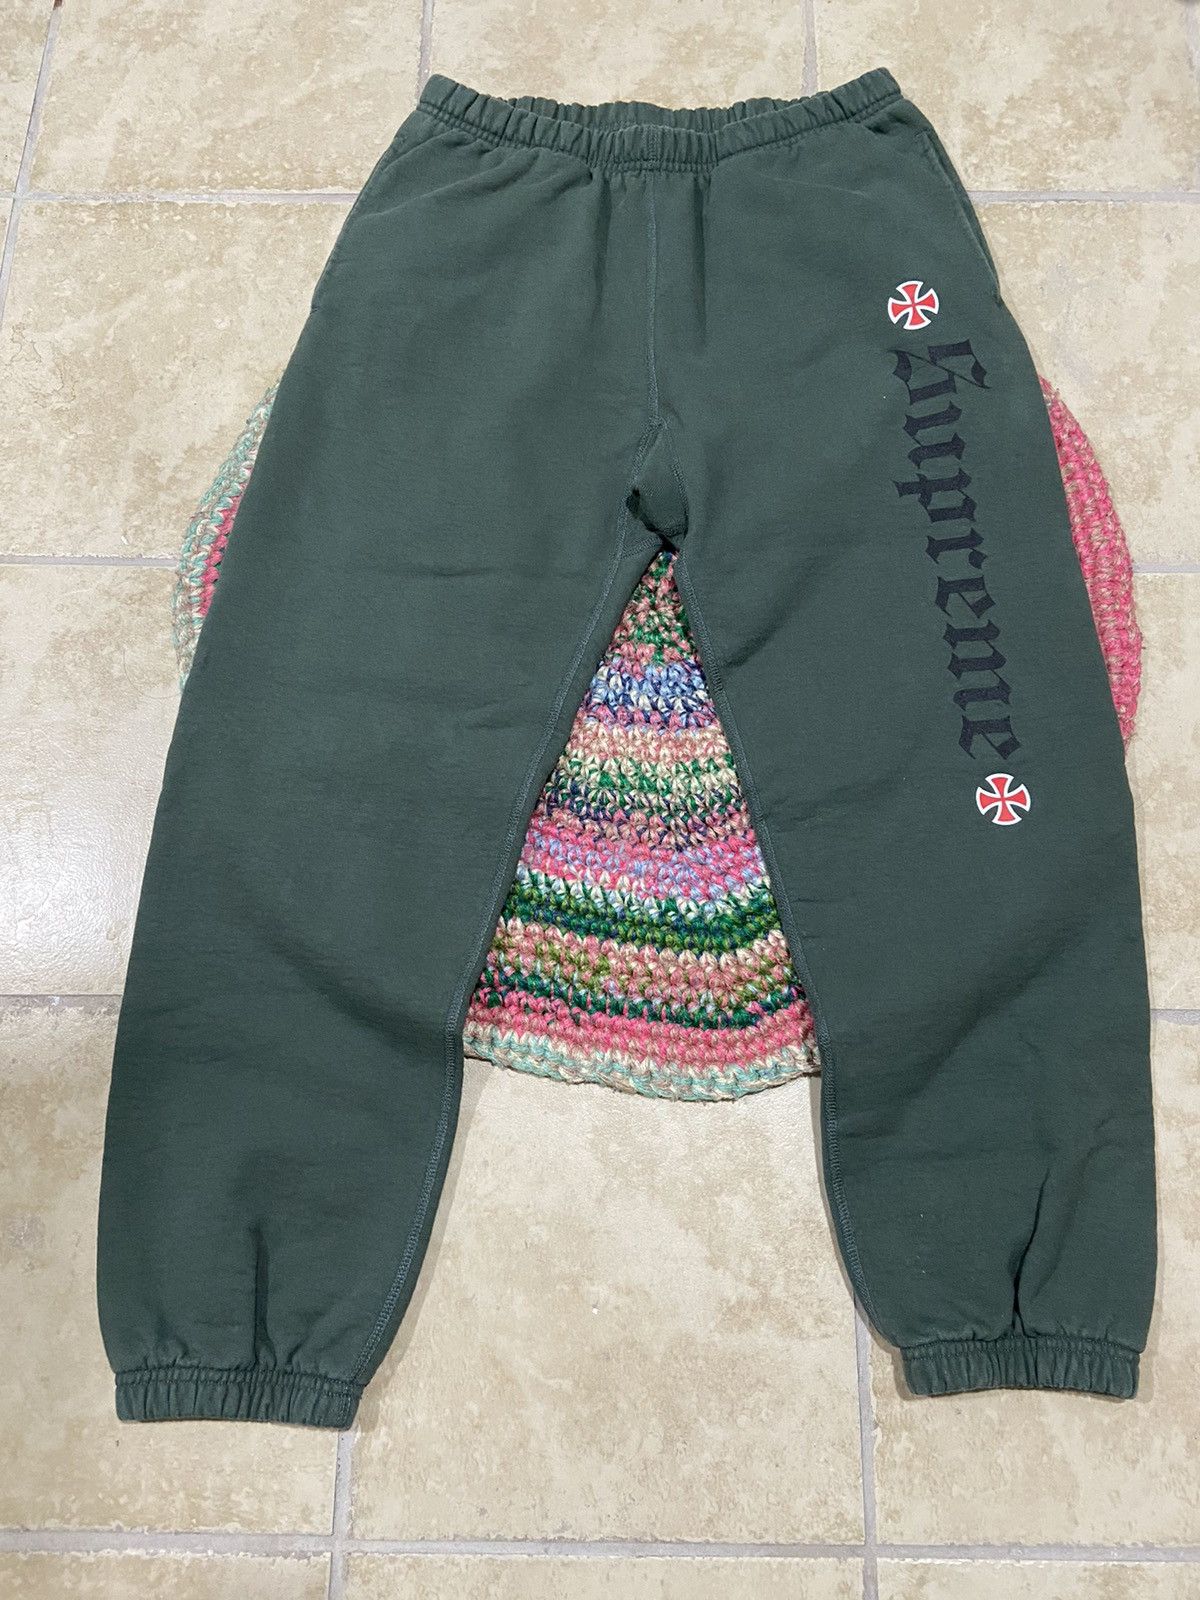 Supreme Supreme Independent FW17 Sweats | Grailed